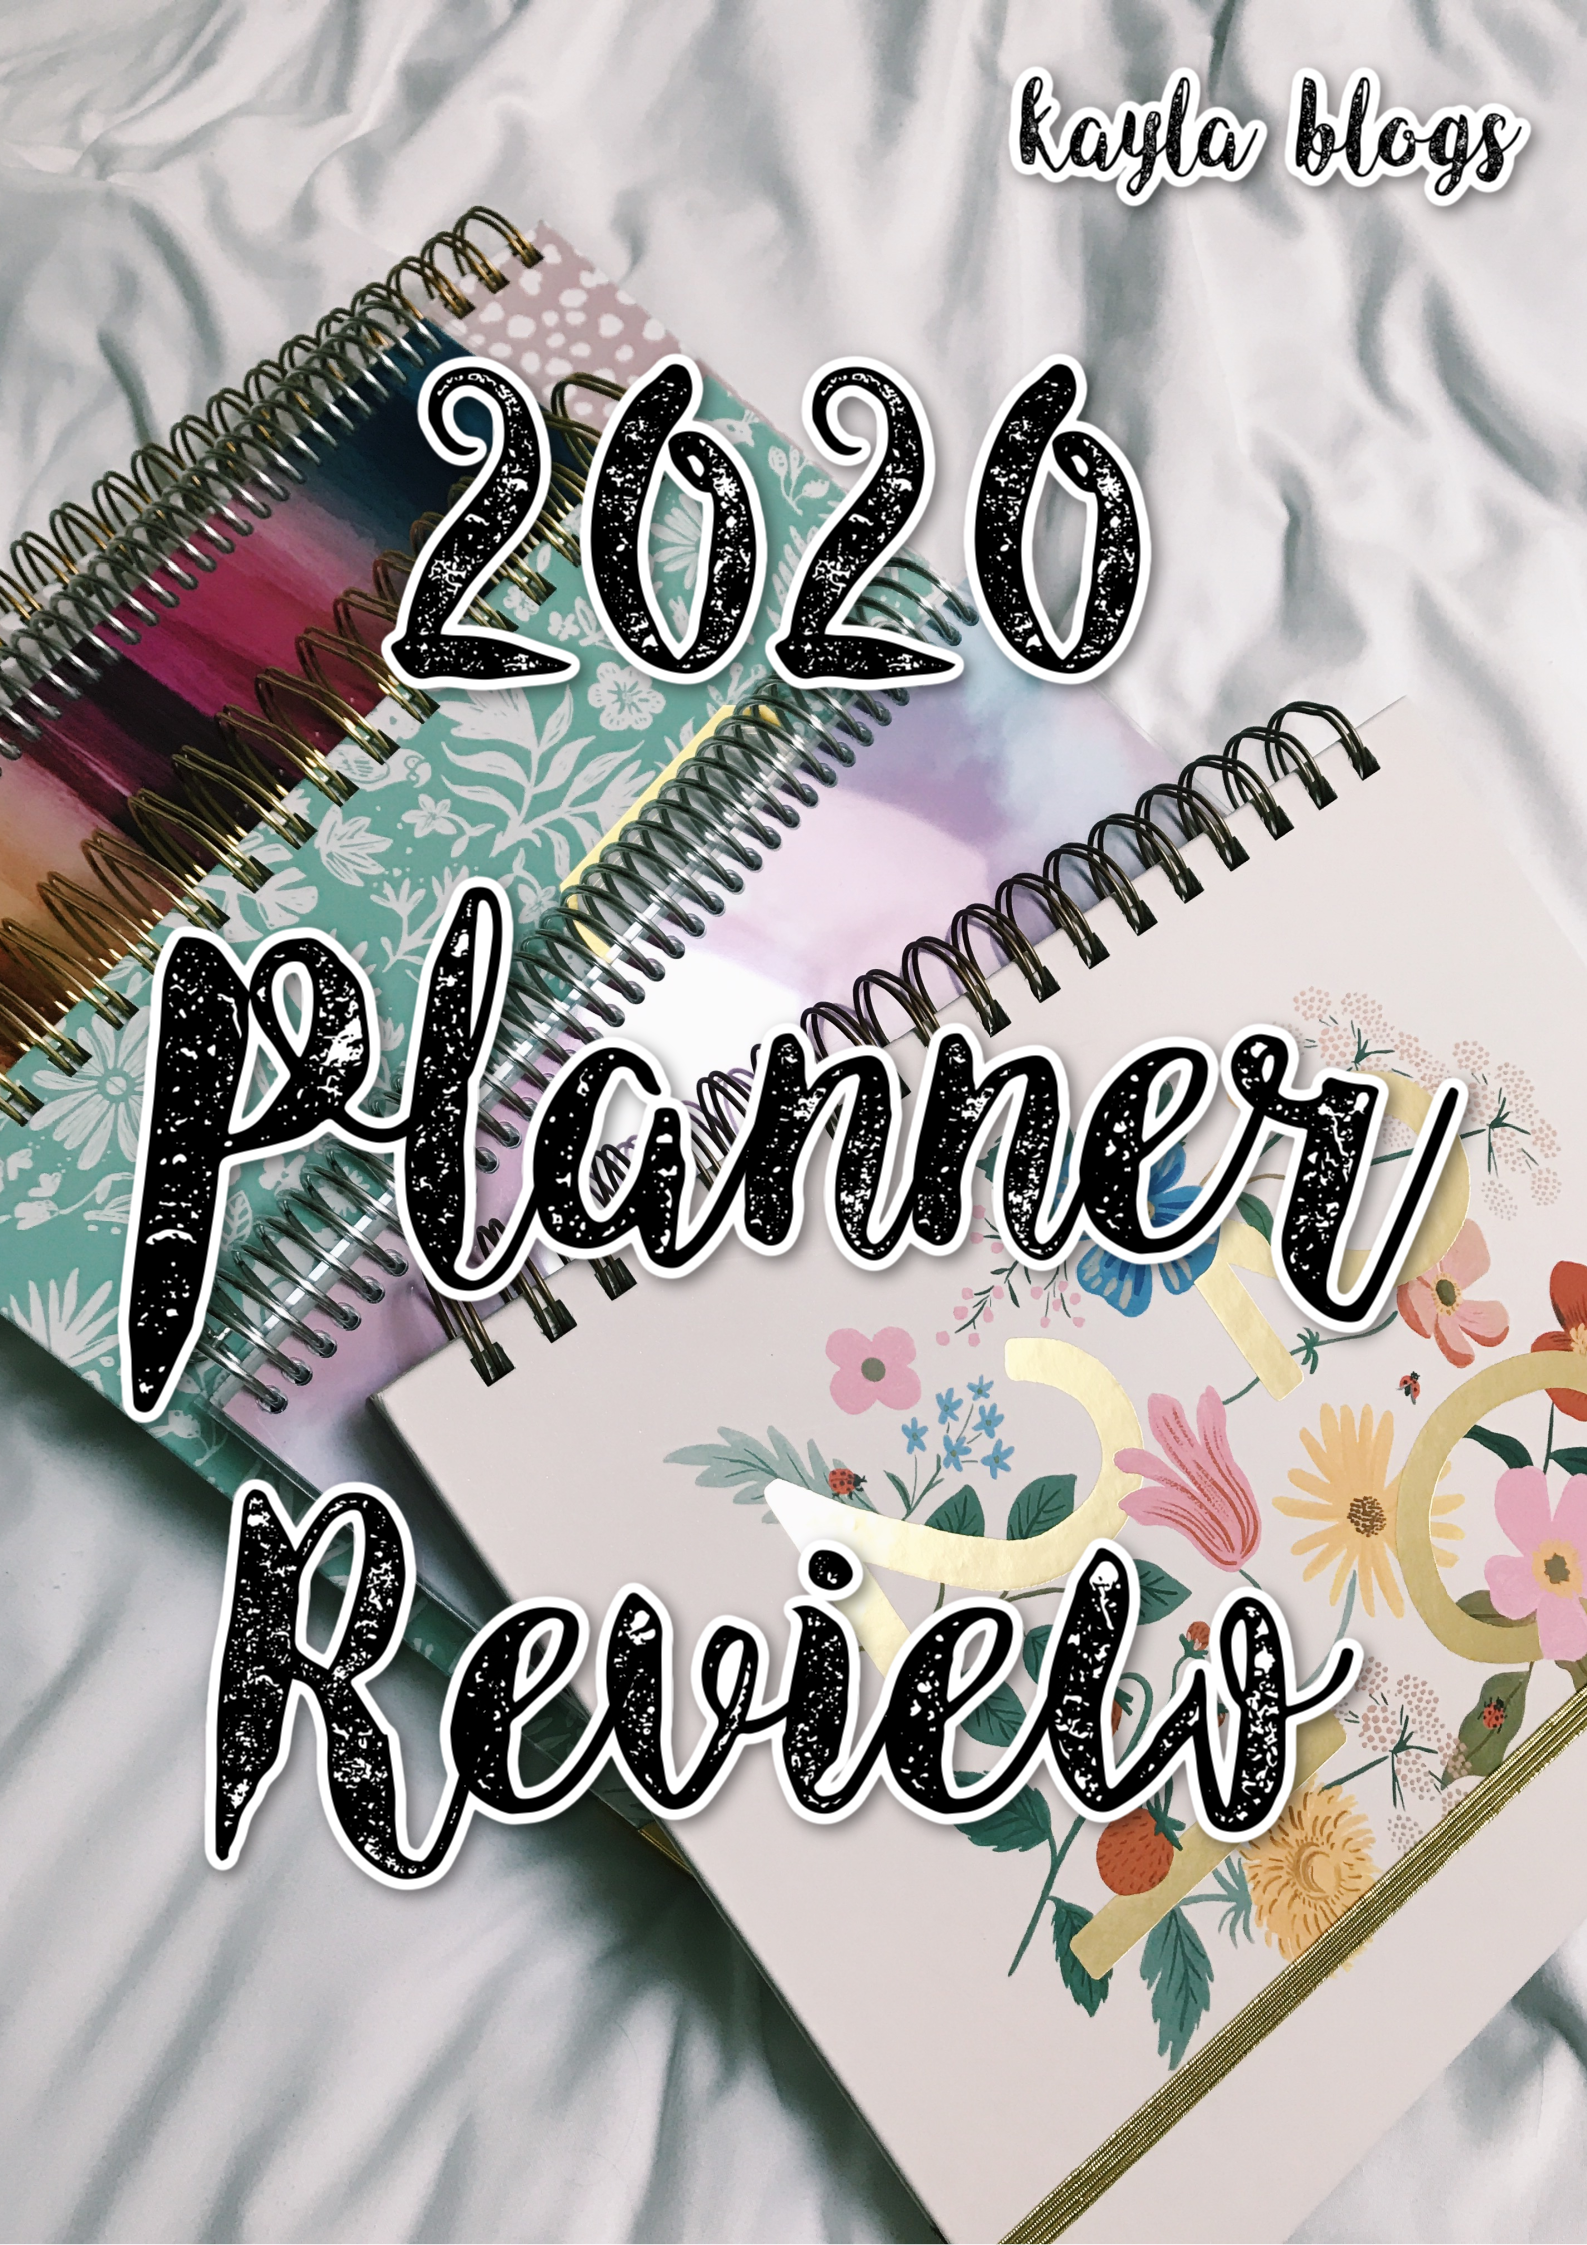 kayla blogs 2020 planner review